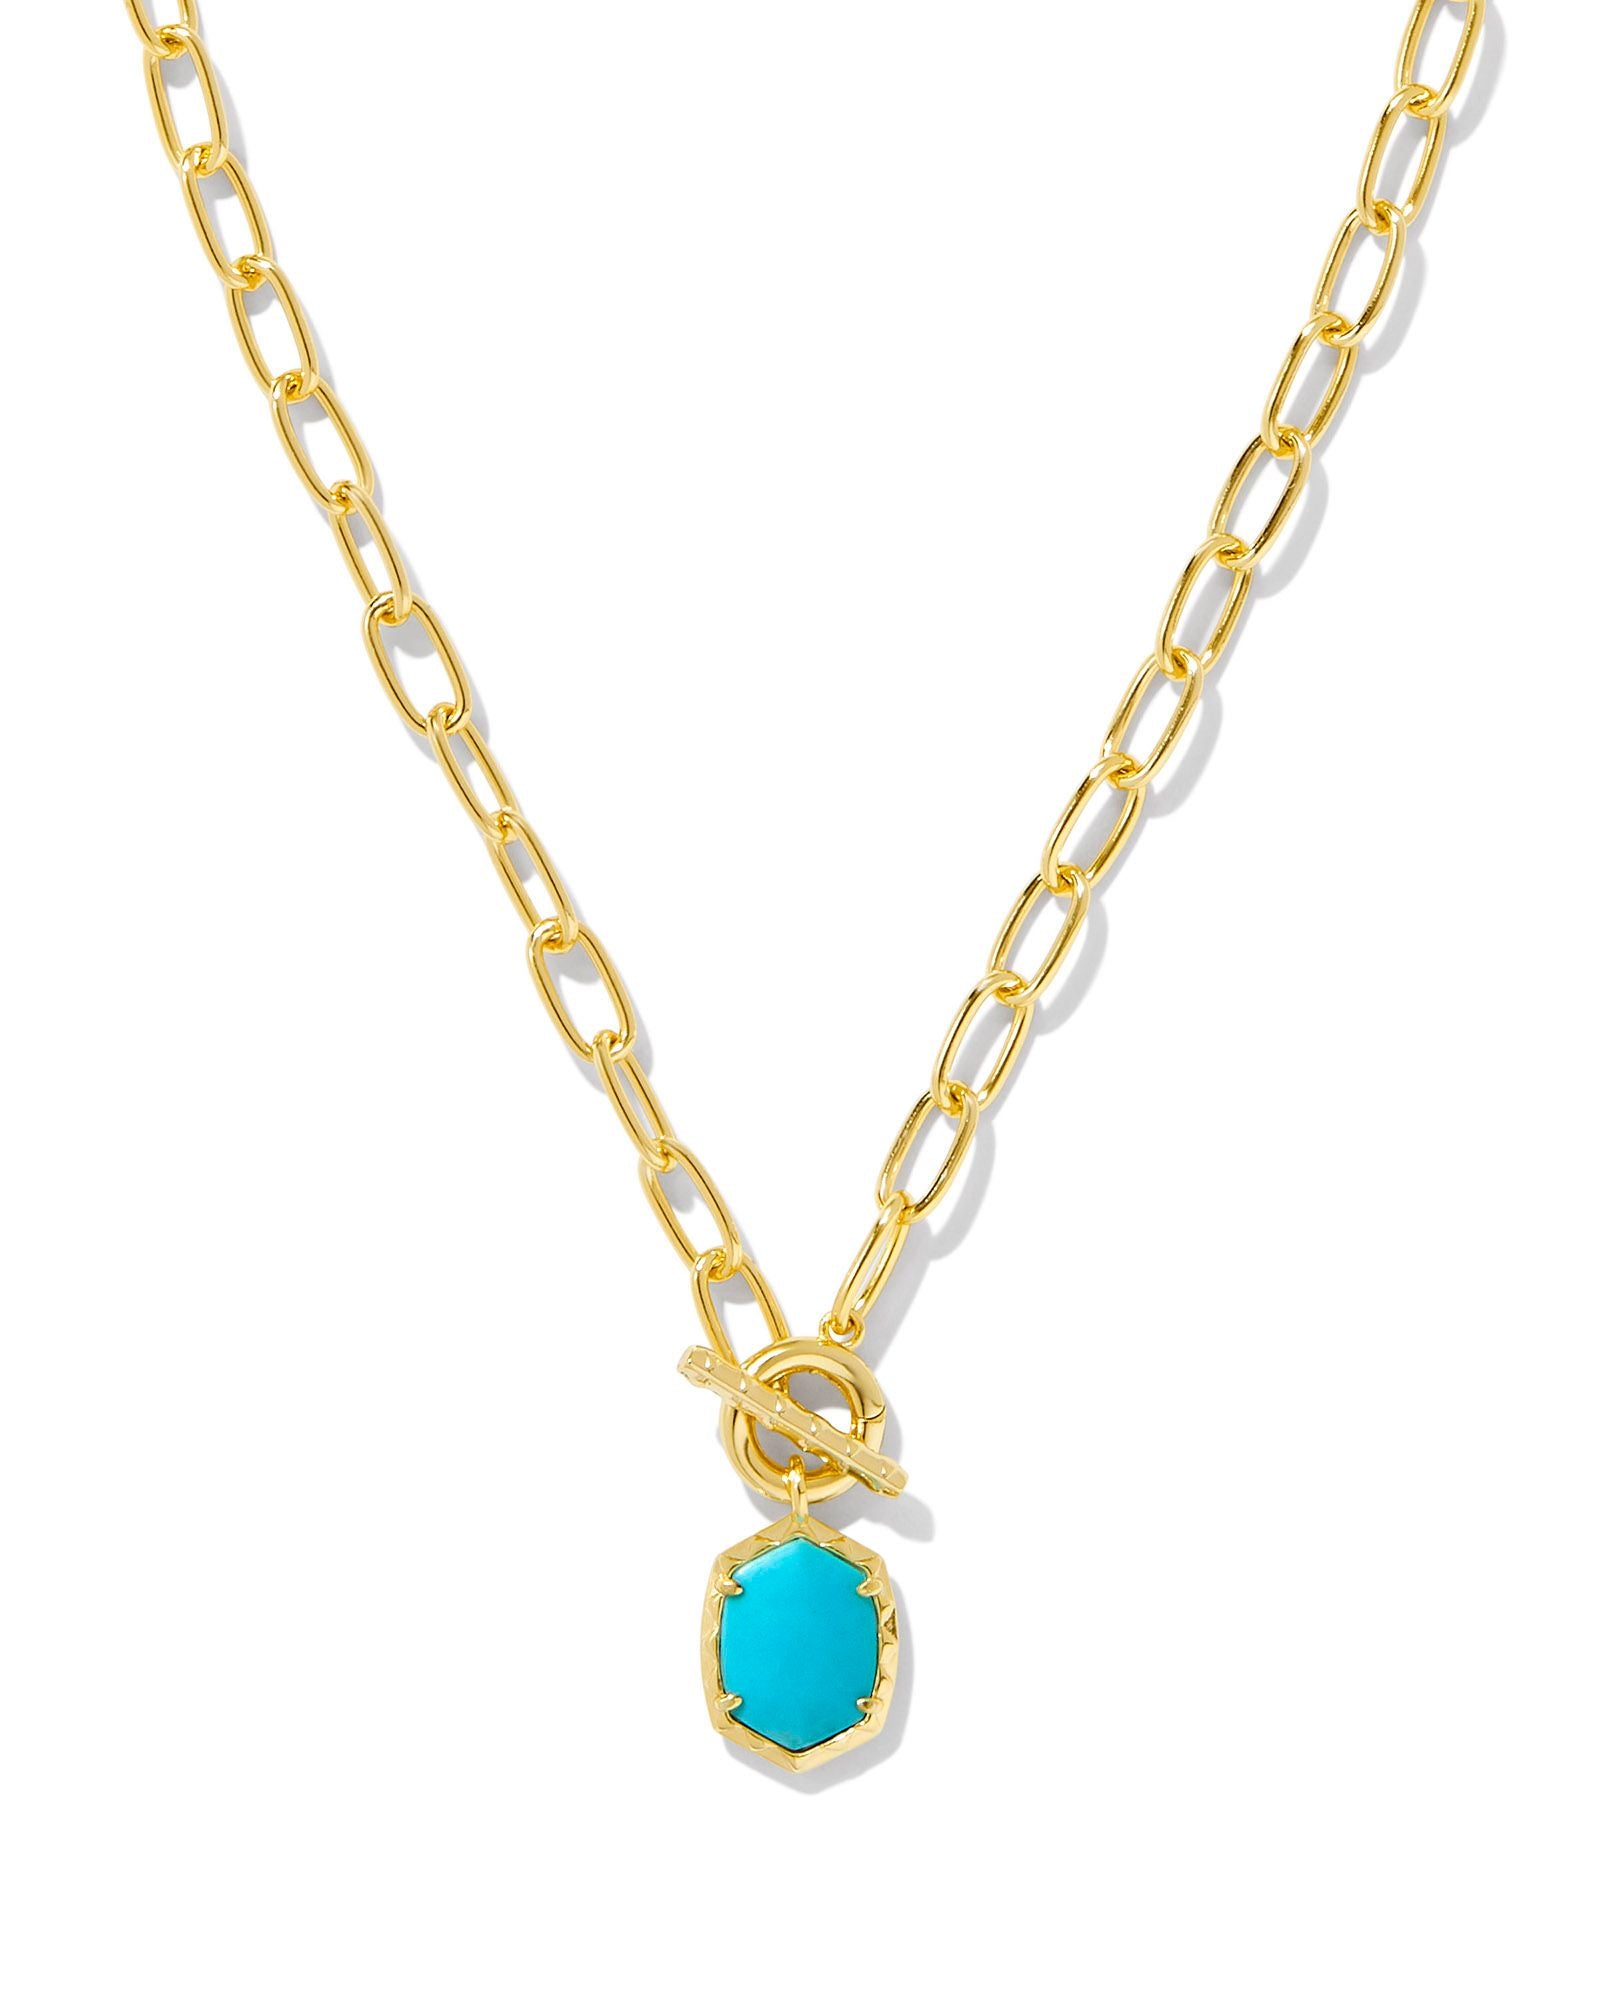 Daphne Link And Chain Necklace Gold Variegated Turquoise Magnesite